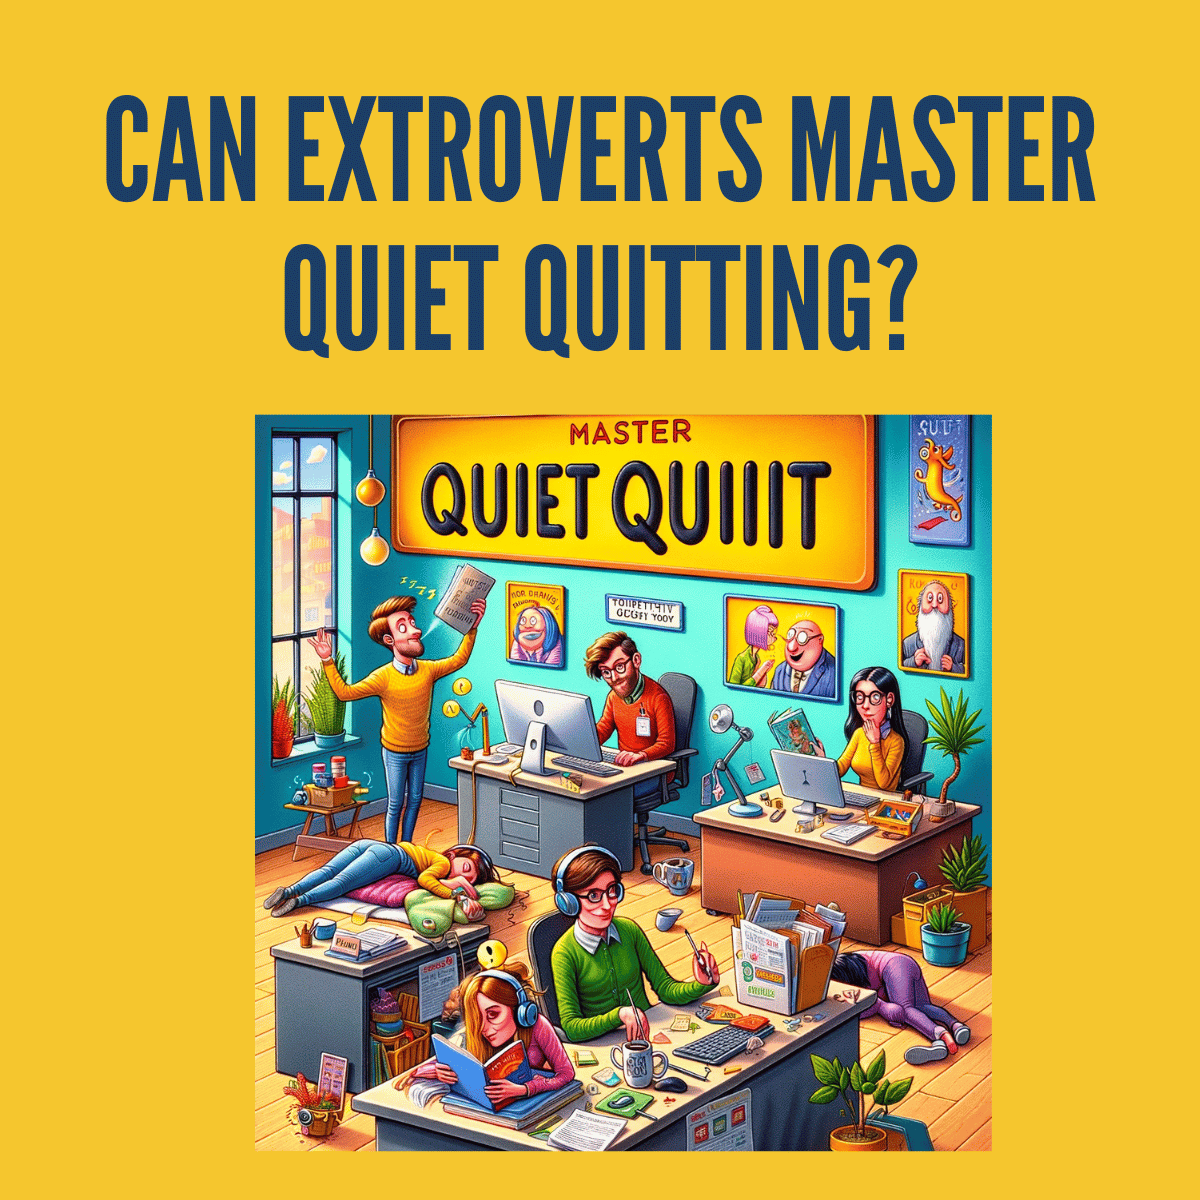 Extroverts and quiet quitting